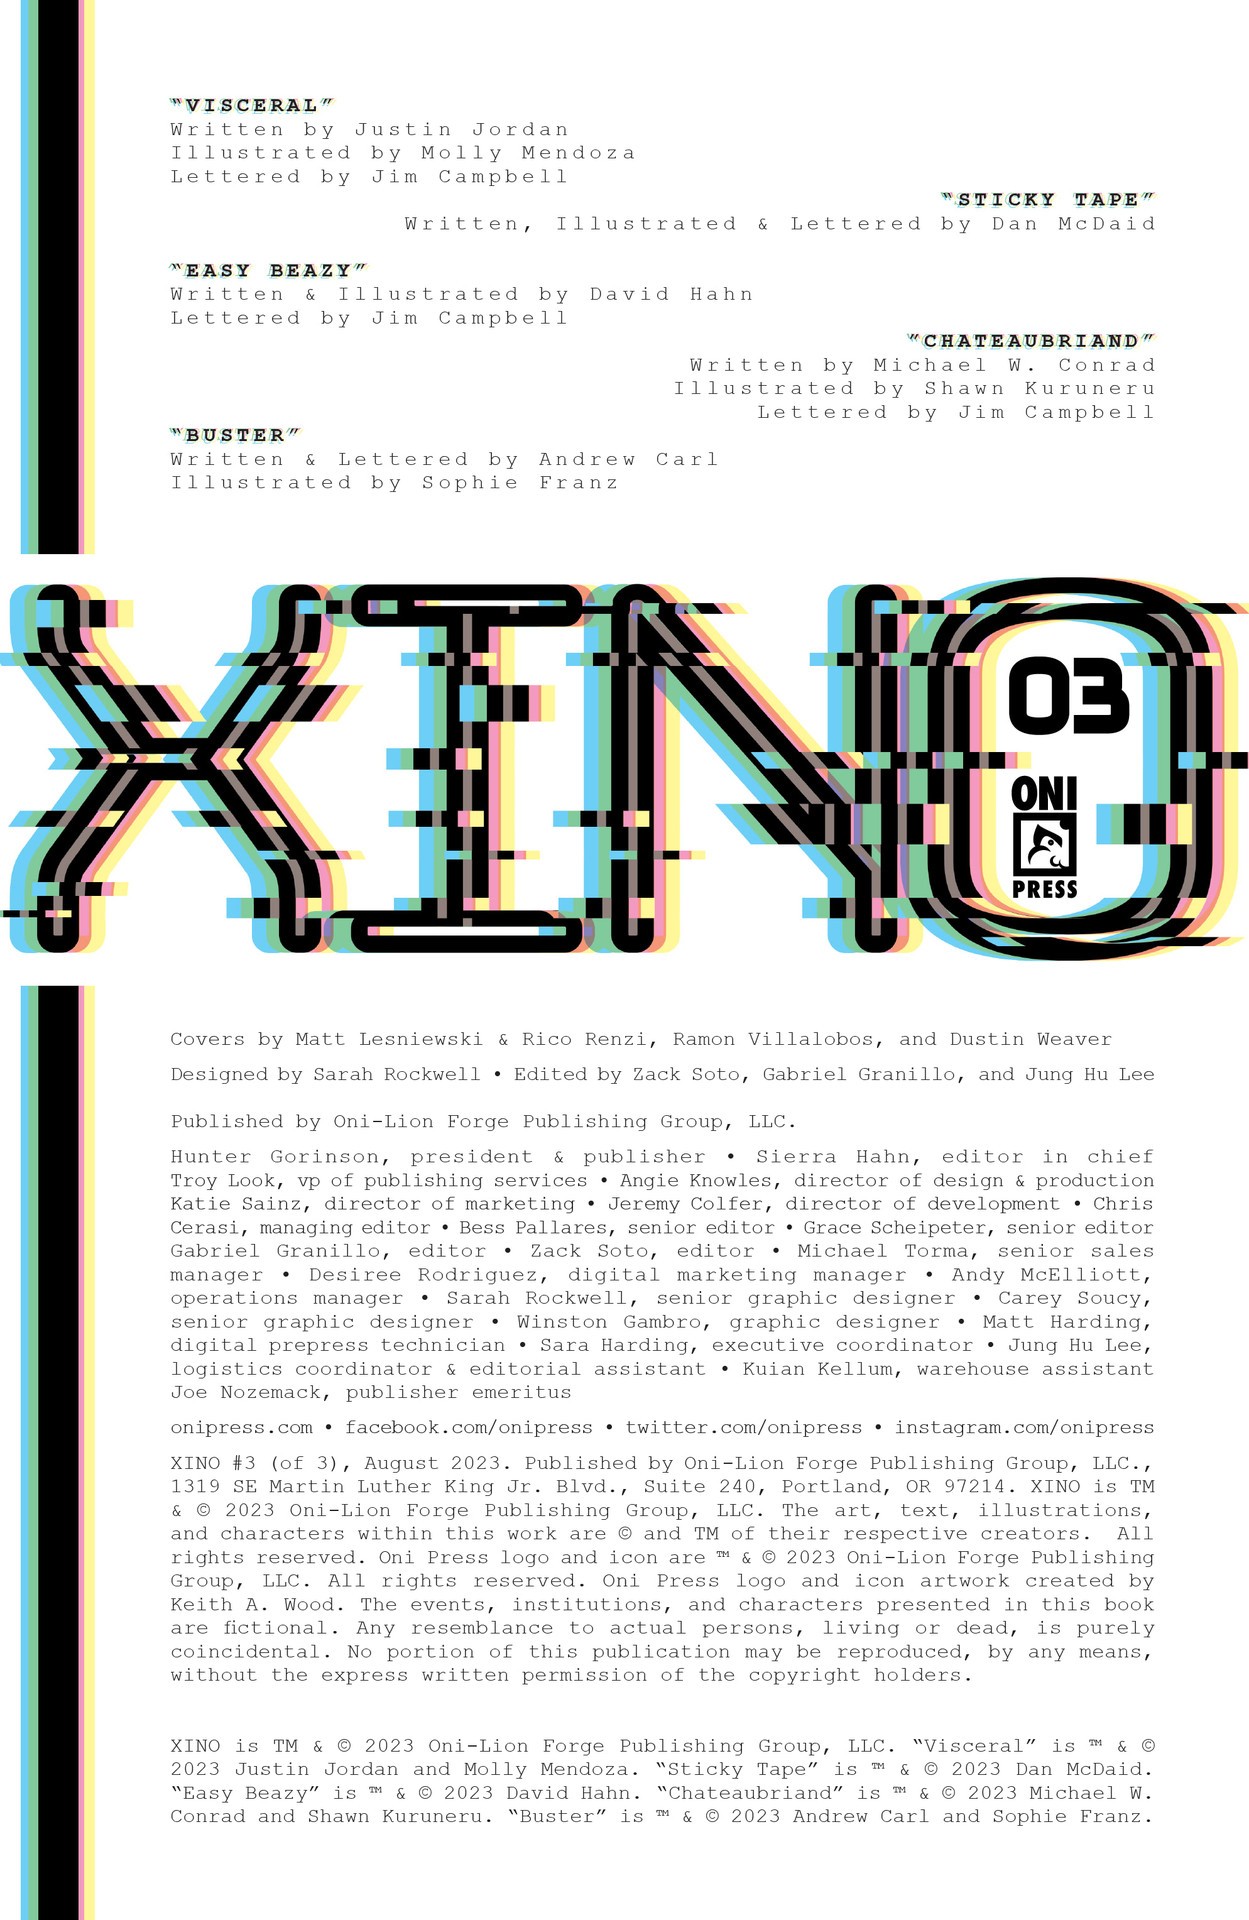 Read online Xino comic -  Issue #3 - 2